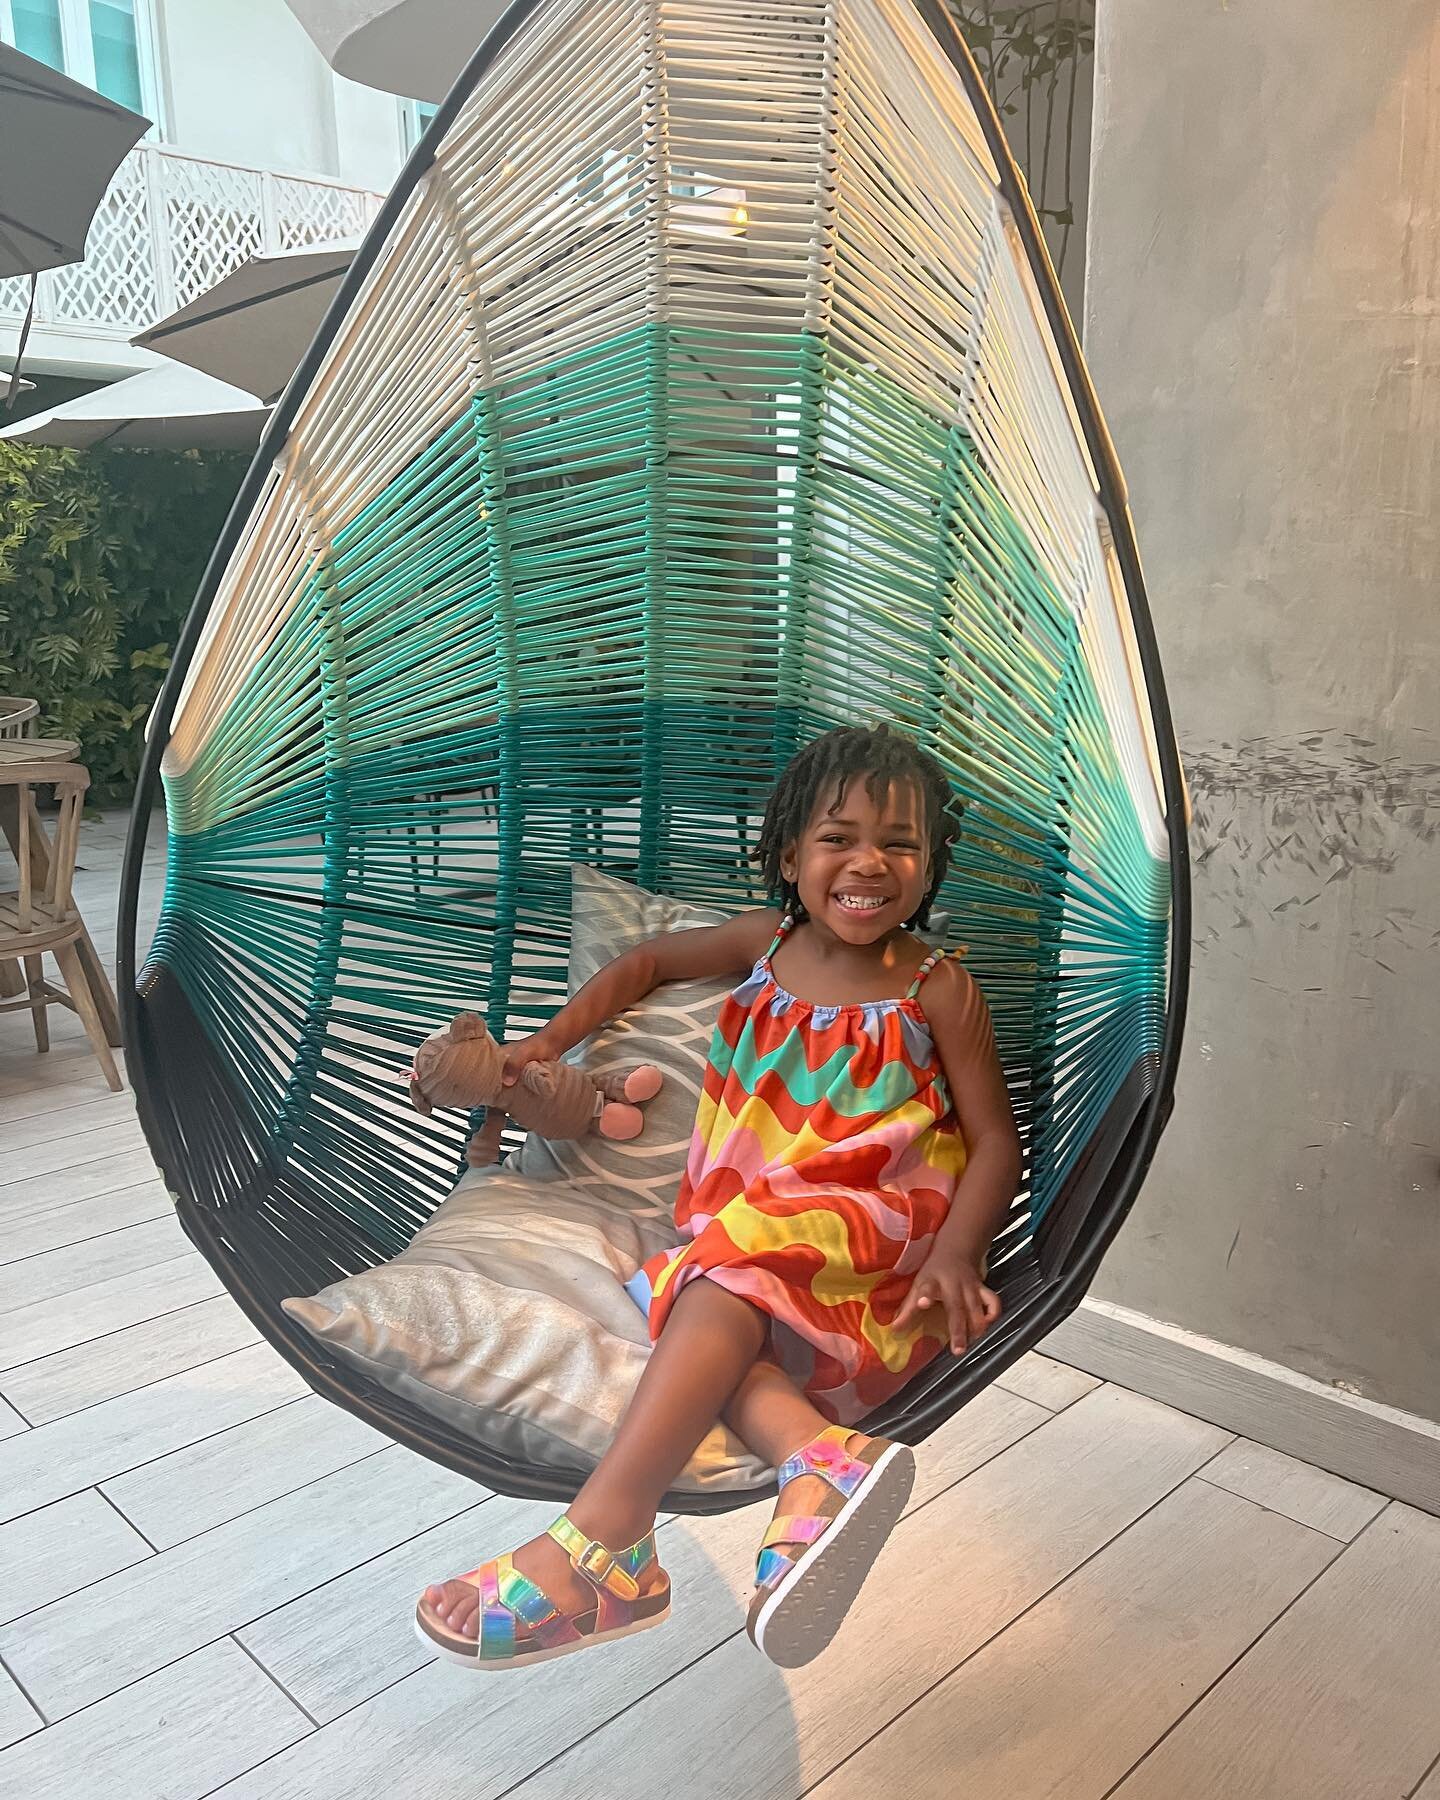 Just some Tori #ootd in the &ldquo;swing&rdquo; as she calls it. I&rsquo;m trying to make up for &ldquo;purple toe gate&rdquo; so she got extra beach time today. (If you watch my stories you know what purple toe gate was🤣😂🤣)
.
.
.
.

We love this 